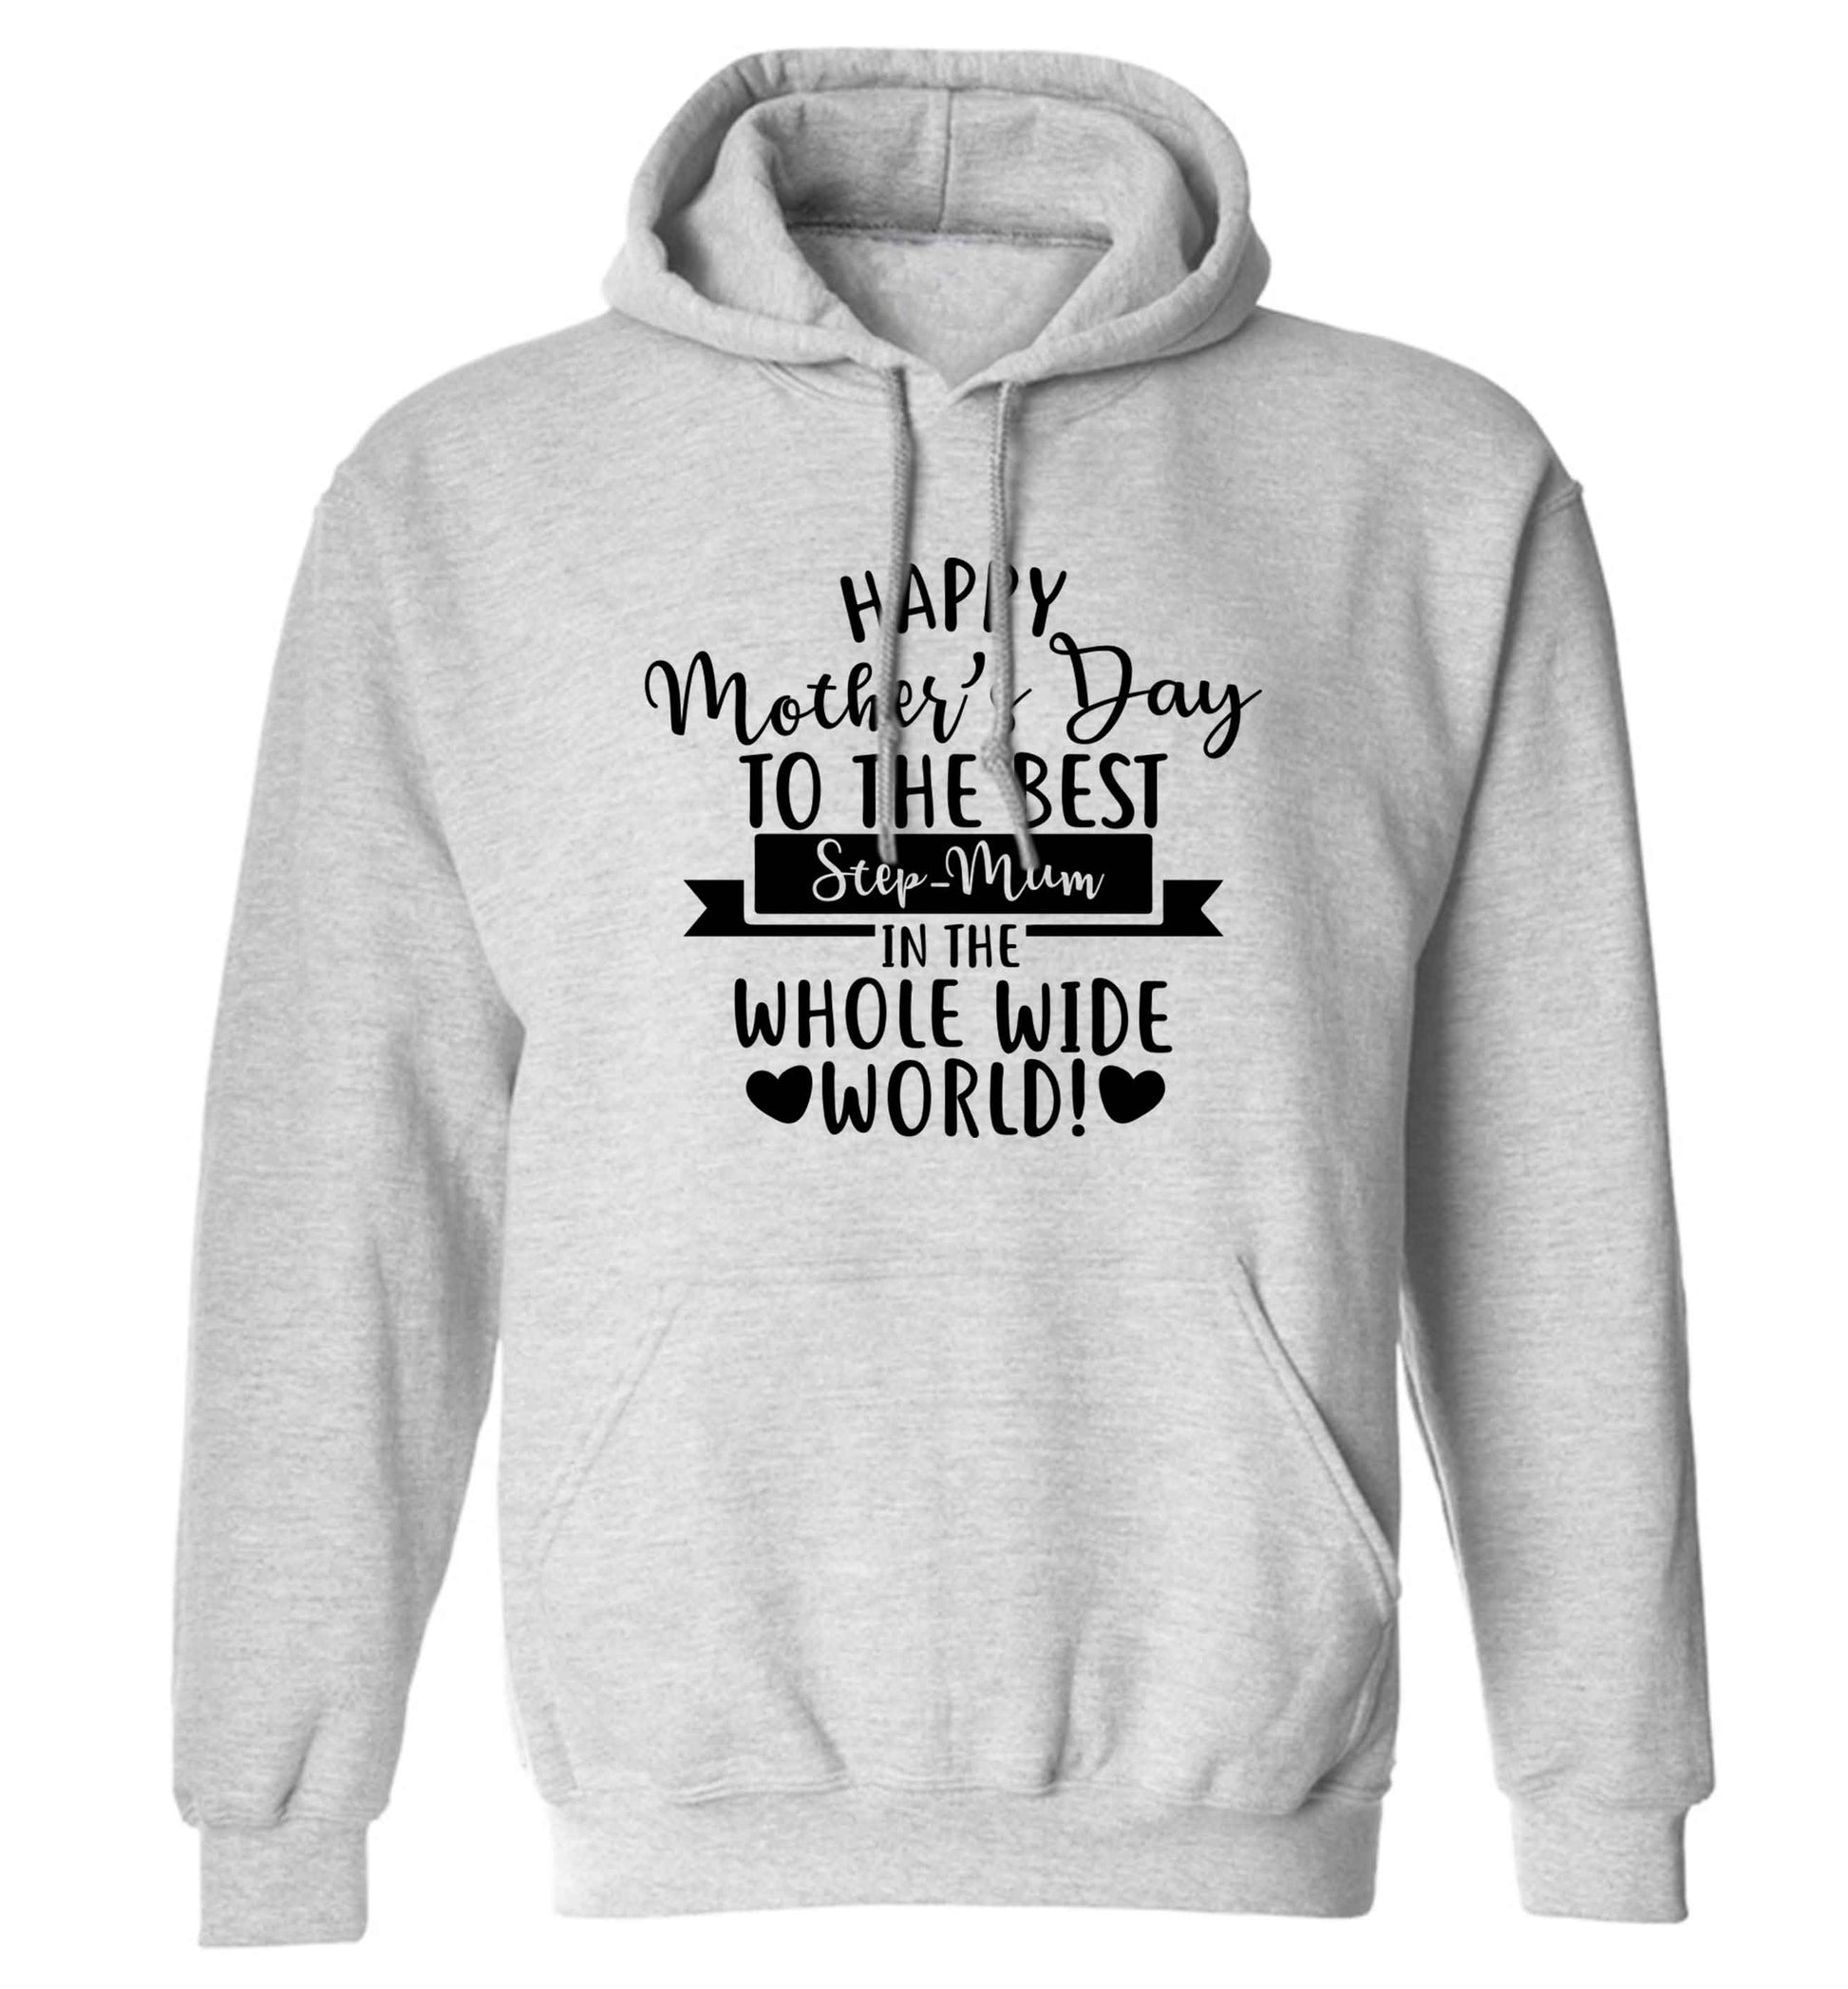 Happy mother's day to the best step-mum in the world adults unisex grey hoodie 2XL